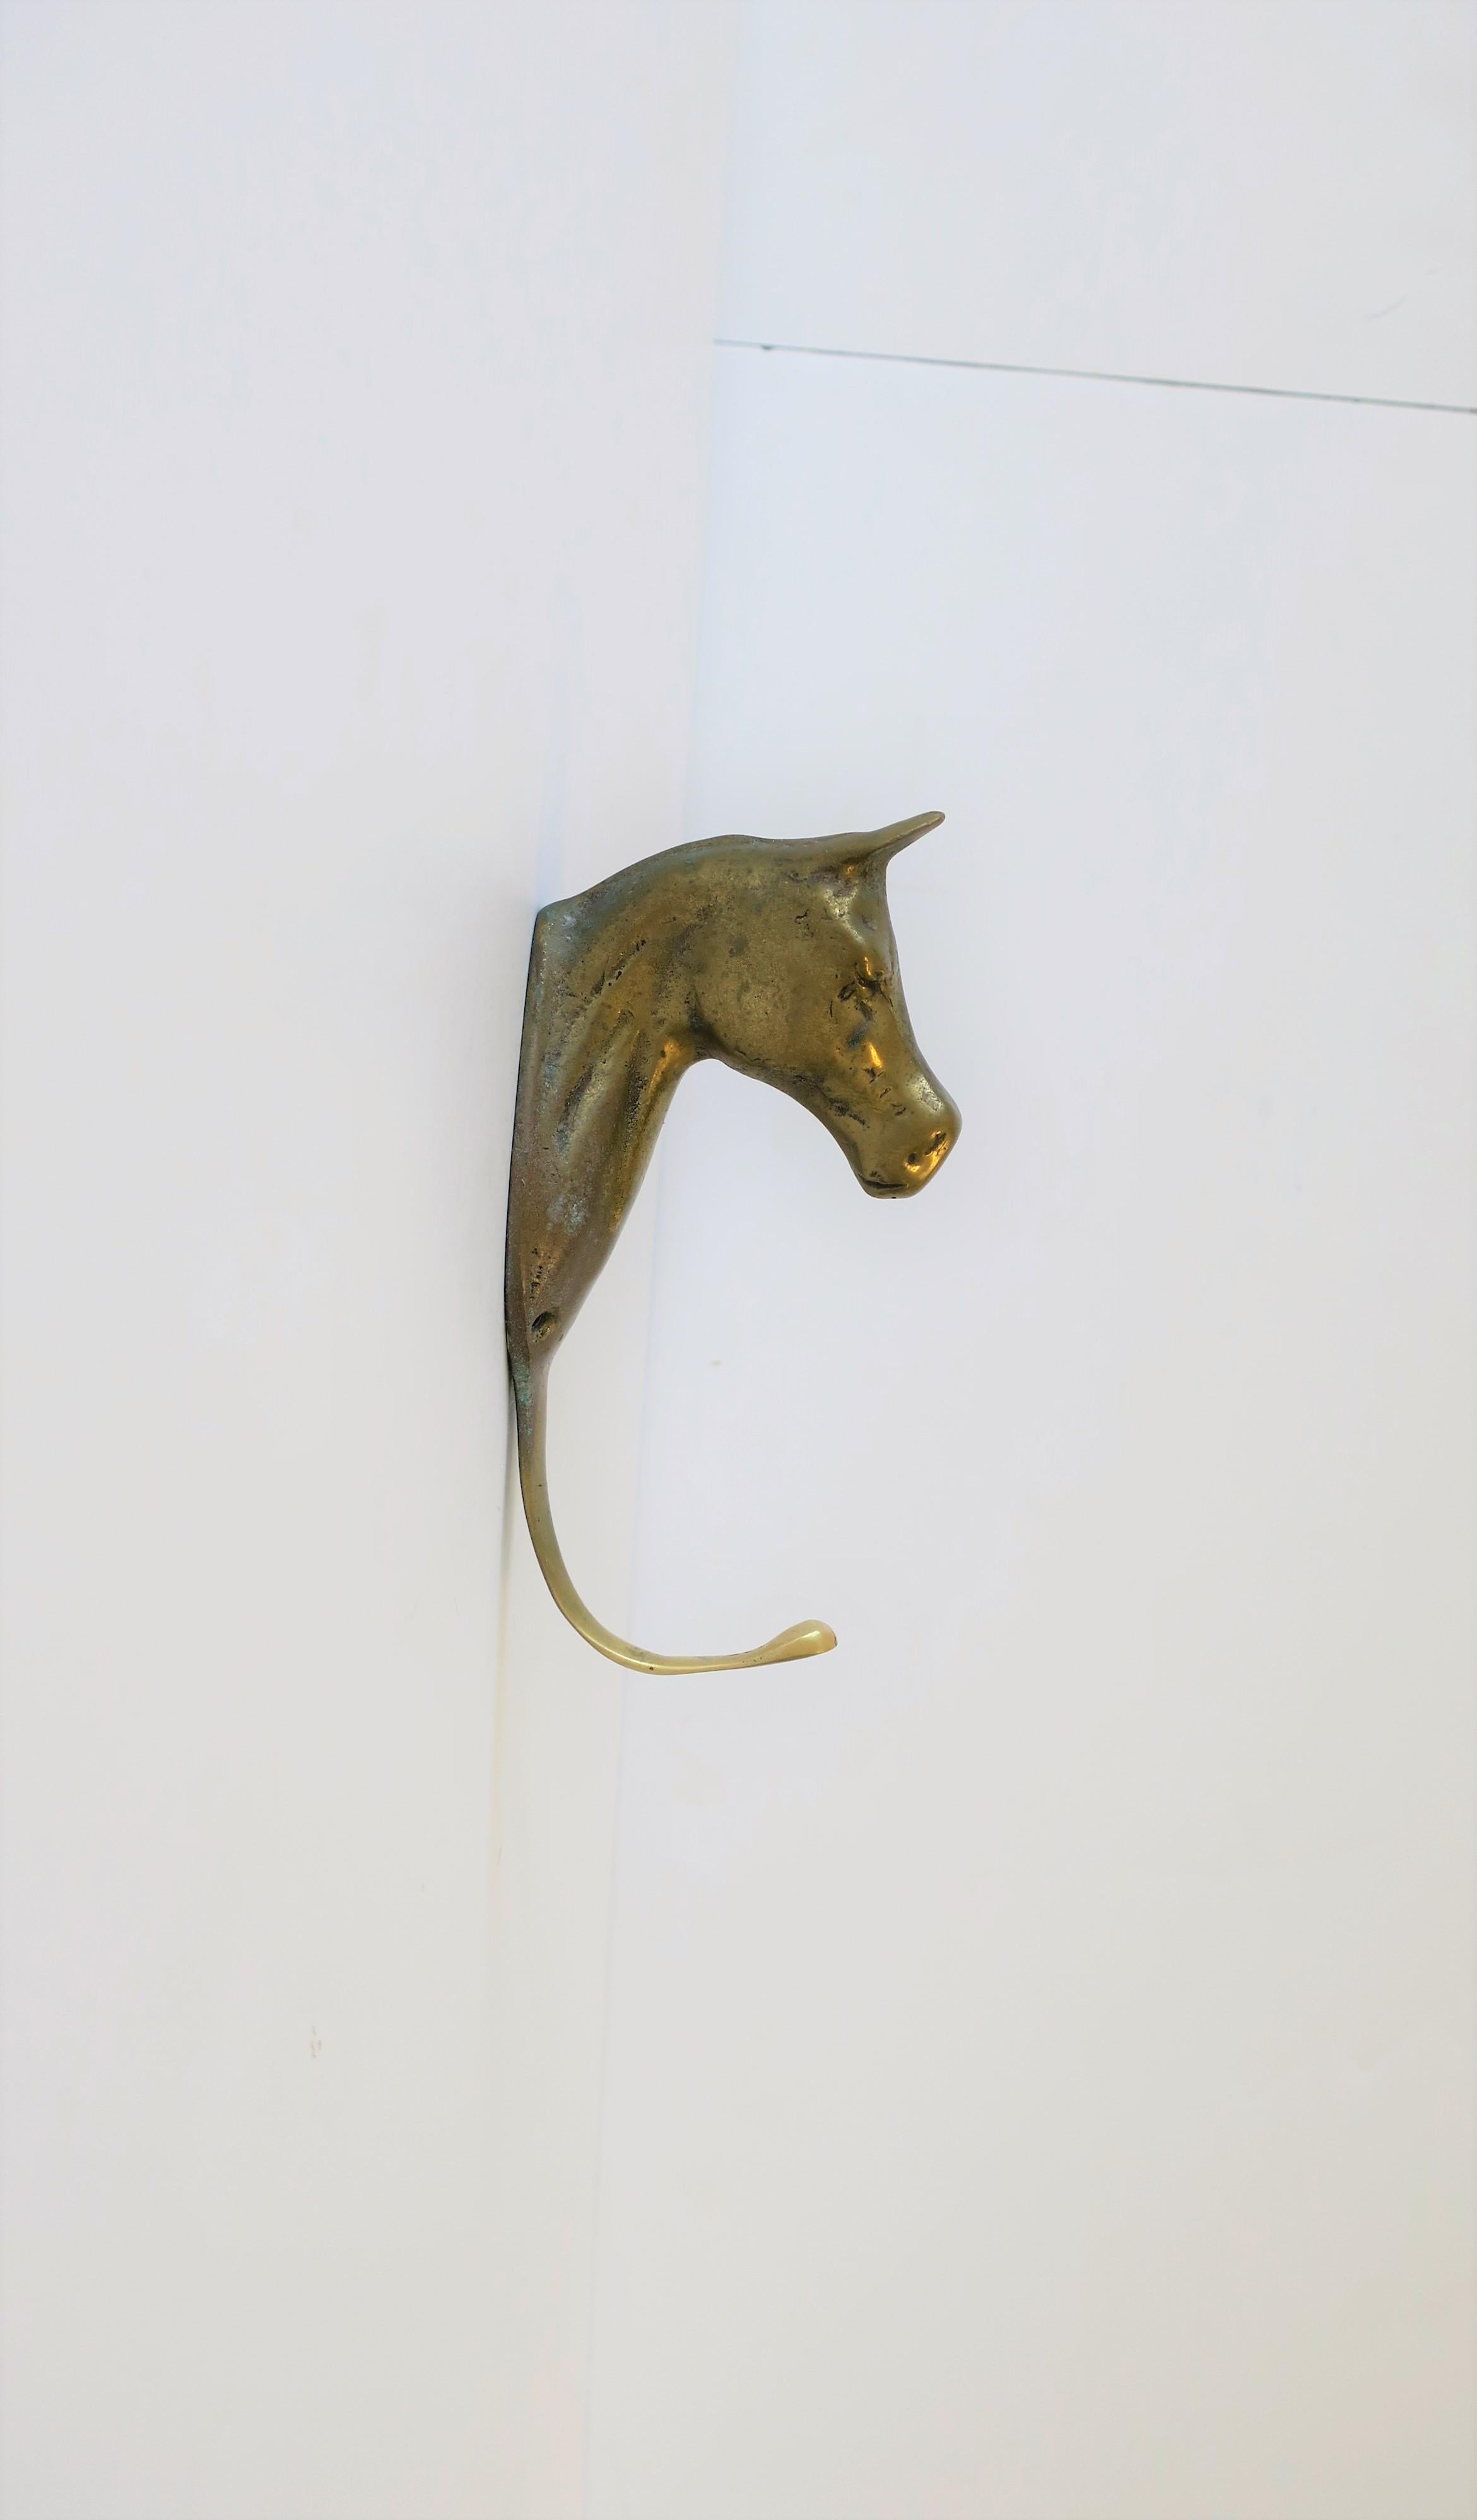 A substantial vintage brass horse or equine hardware wall hook, circa mid-late 20th century, 1960s-1970s. With original screws (in bag), please see image #6. 

Piece measures: 6